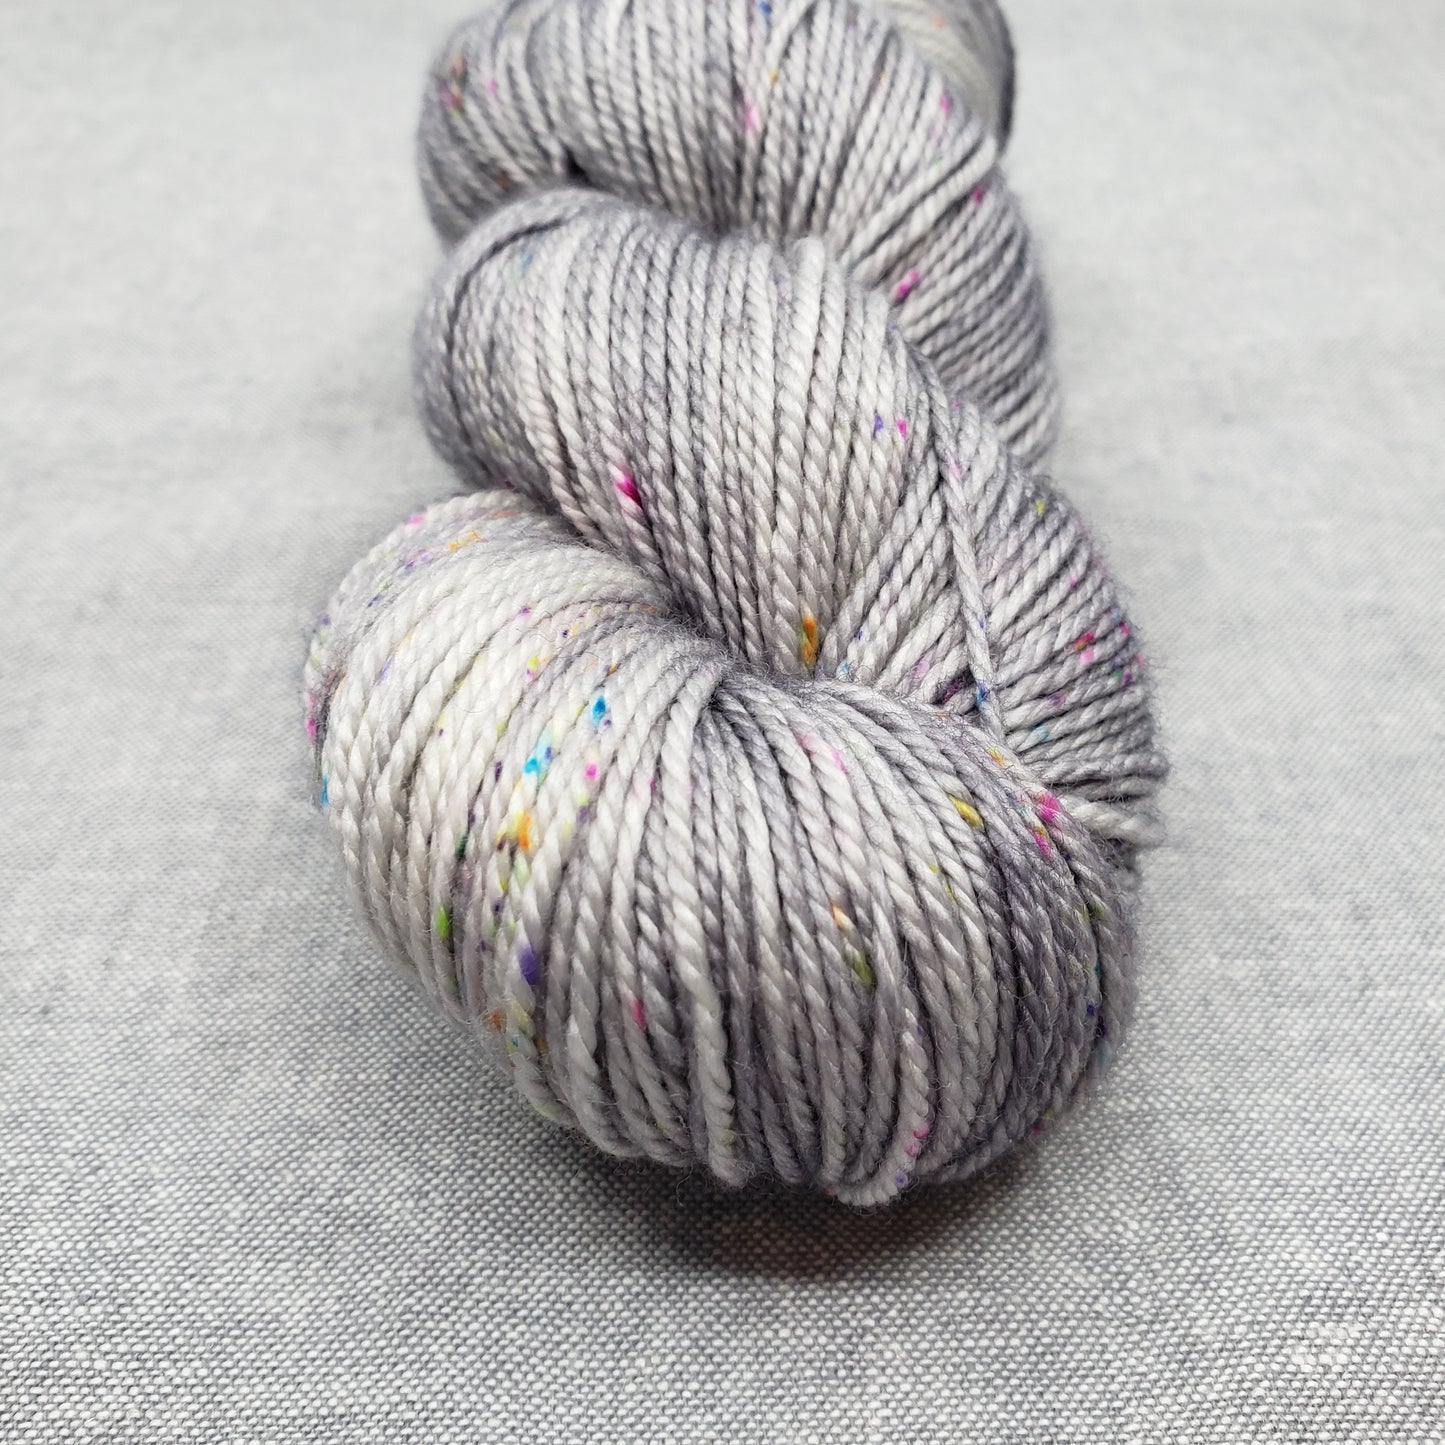 Follow the Call of the Disco Ball - Reef DK